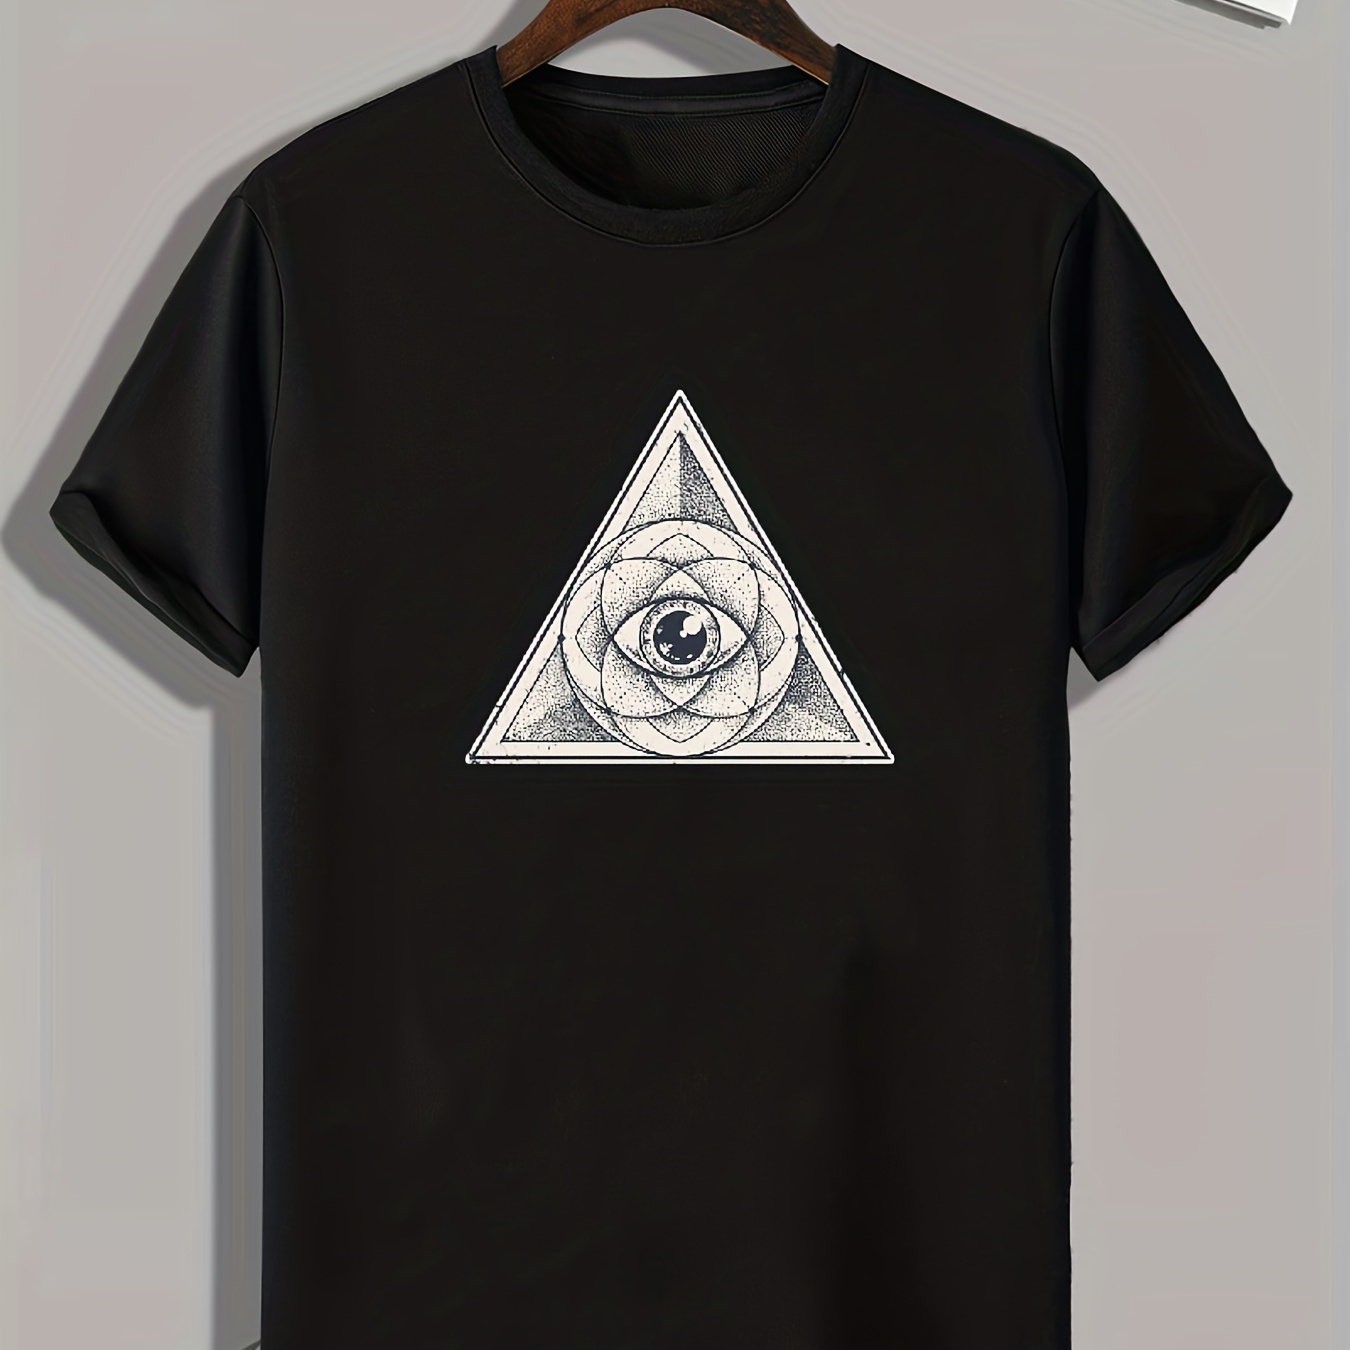 

Triangle & Eye Print, Men's Trendy Comfy T-shirt, Active Slightly Stretch Breathable Tee For Outdoor Summer